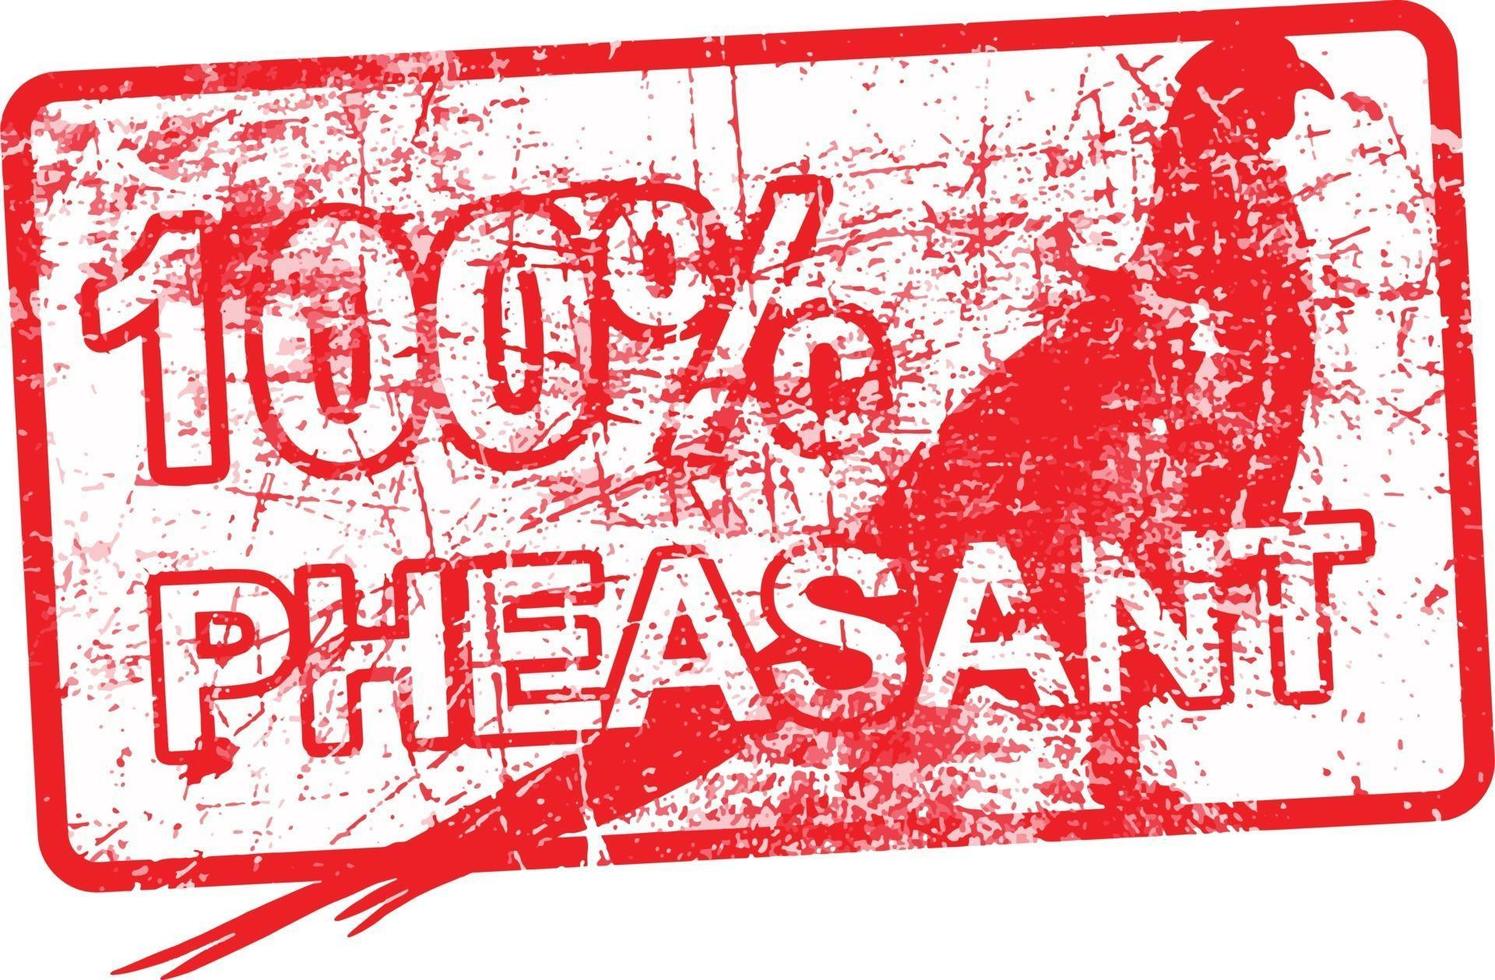 100 per cent pheasant - red rubber dirty grungy stamp vector